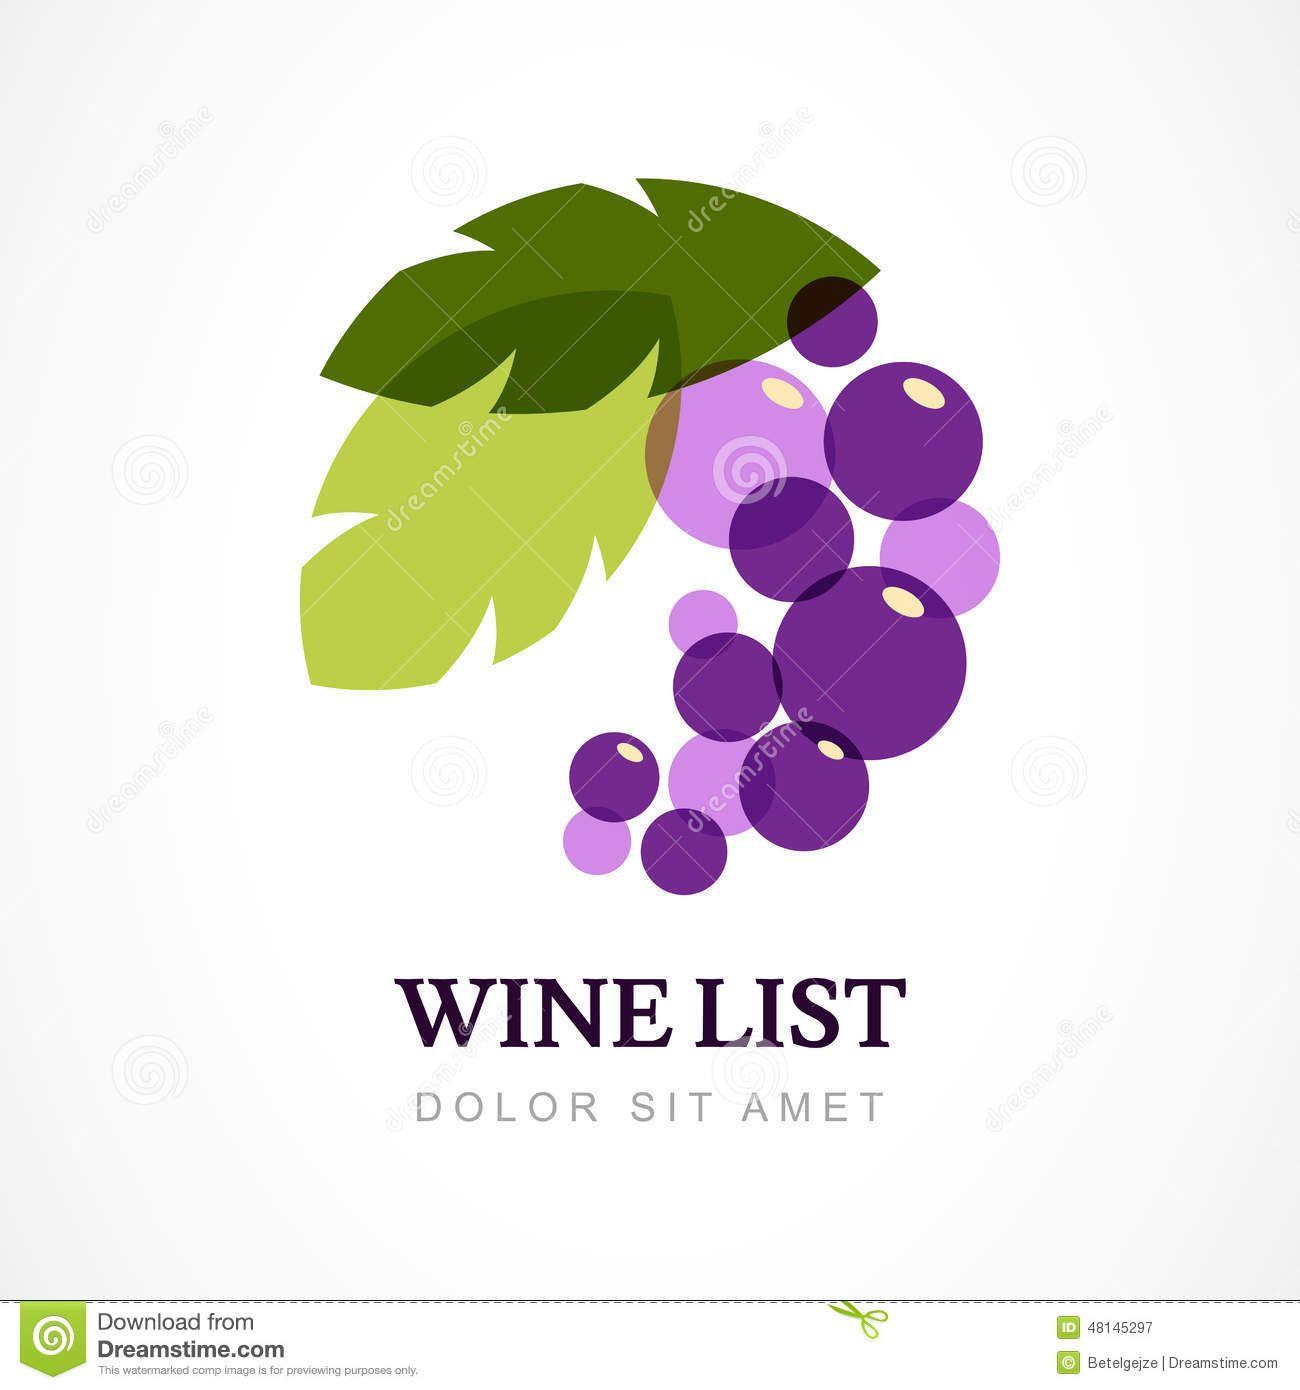 Grape Logo - Vector Logo Design Template. Branch Of Grape With Leaves Stock